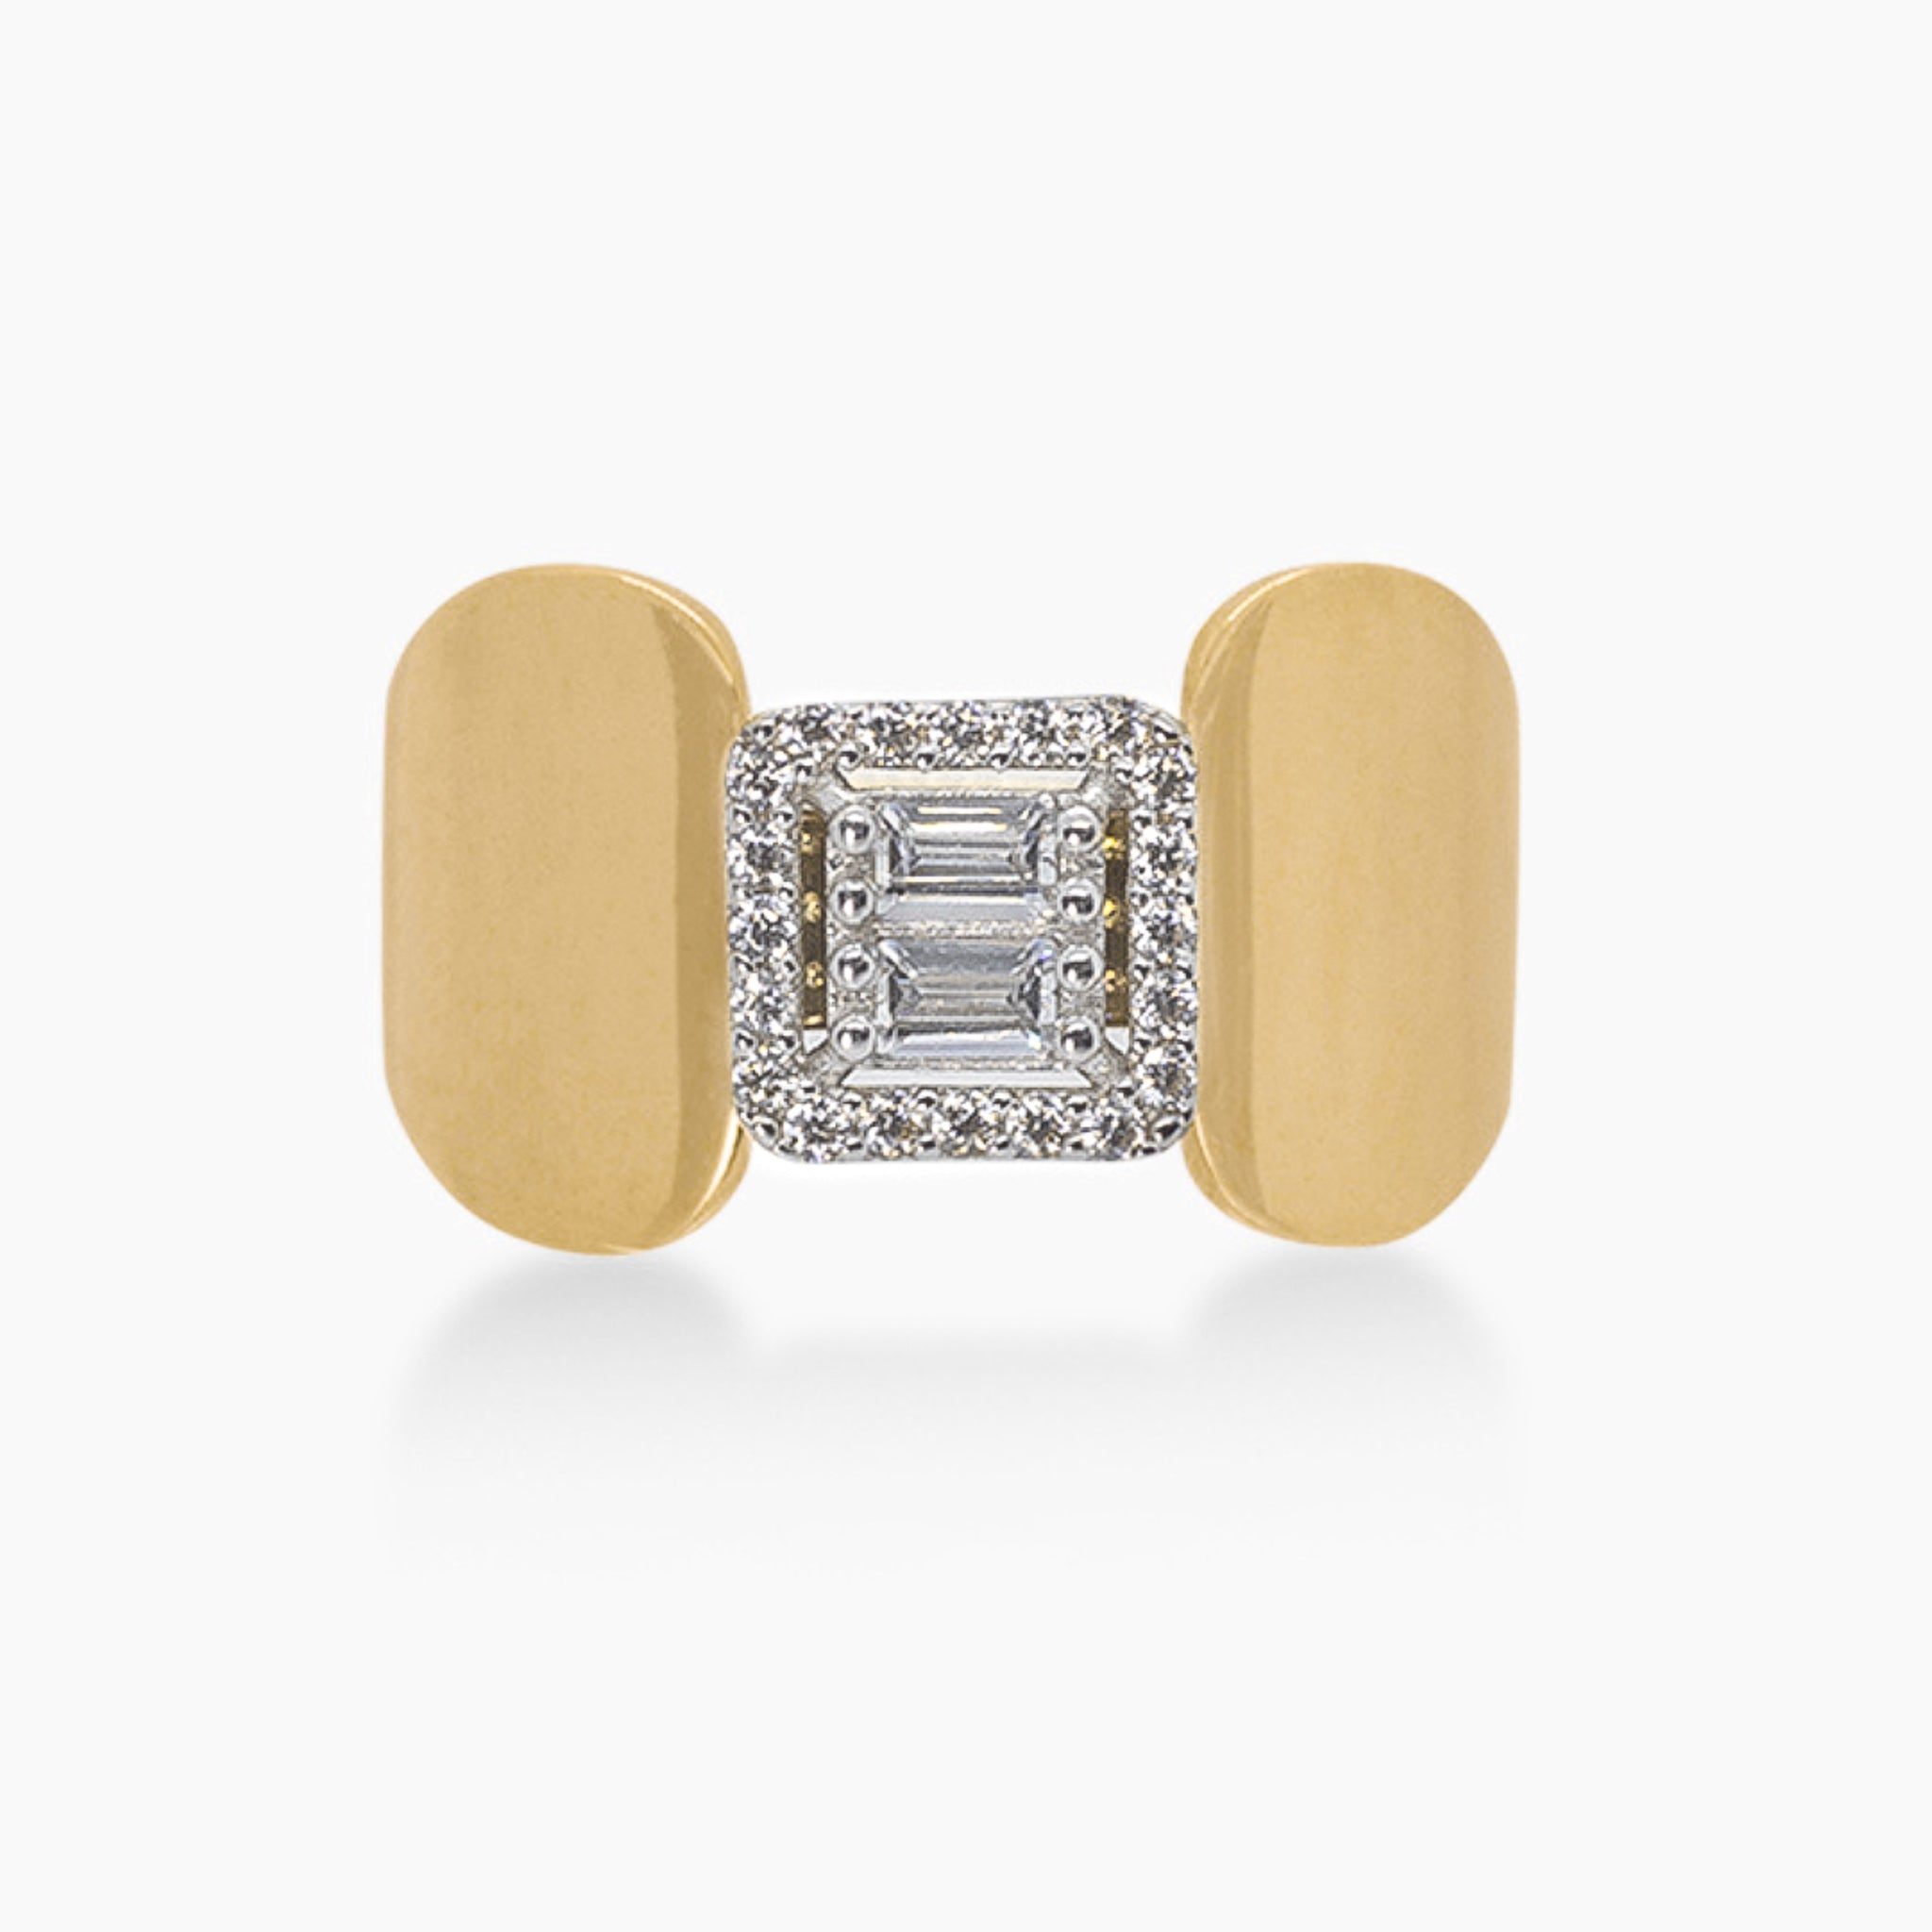 14K YELLOW GOLD JAZZY COCKTAIL PAVE RING